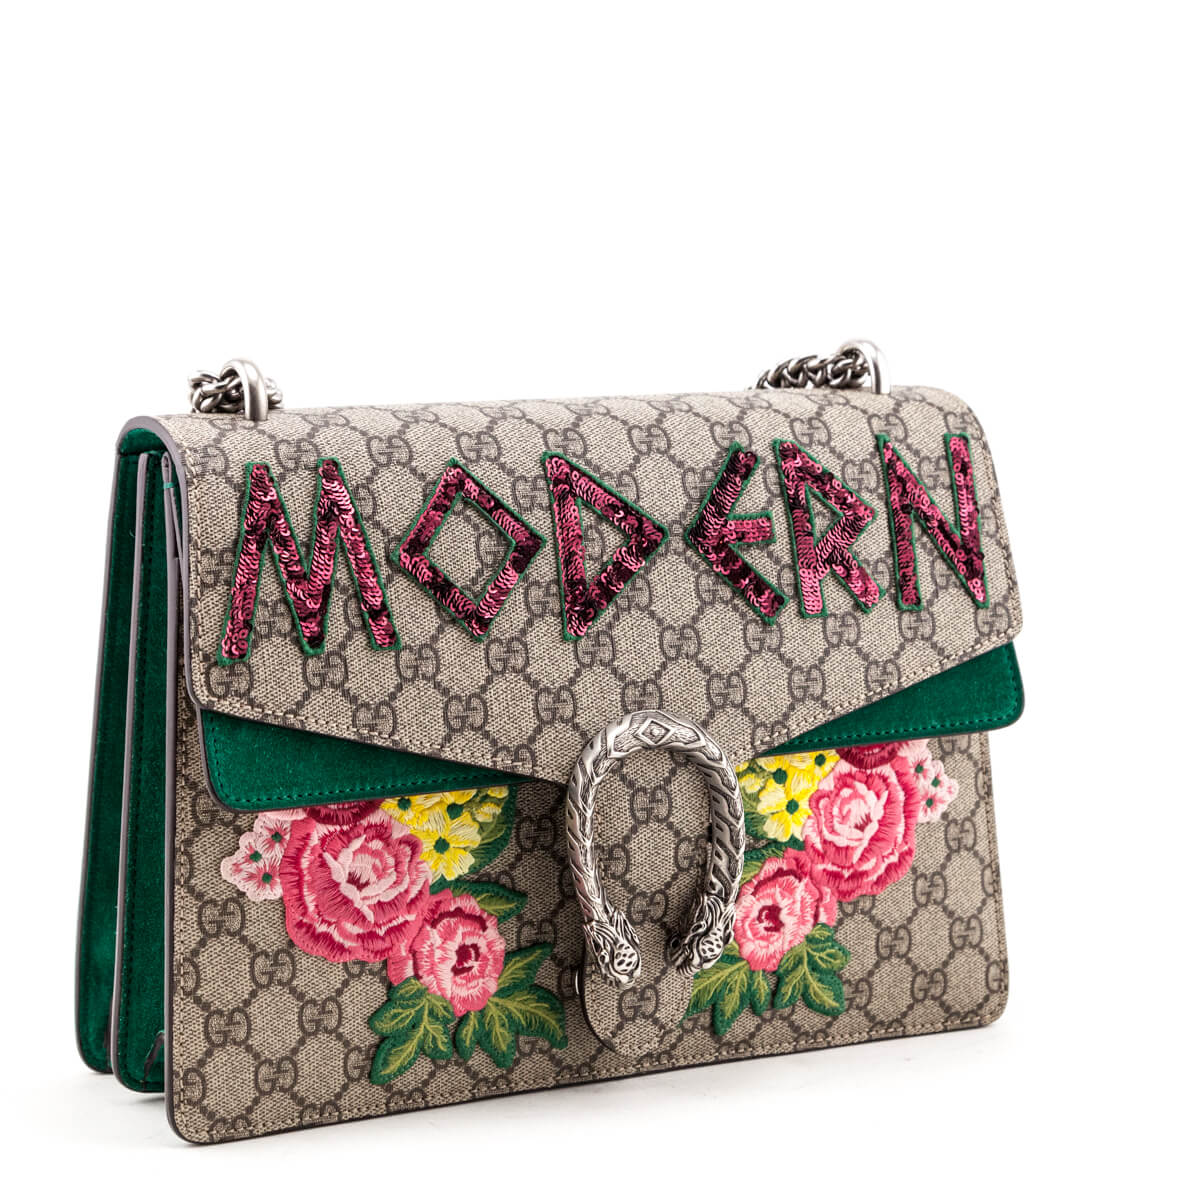 gucci embroidered bag